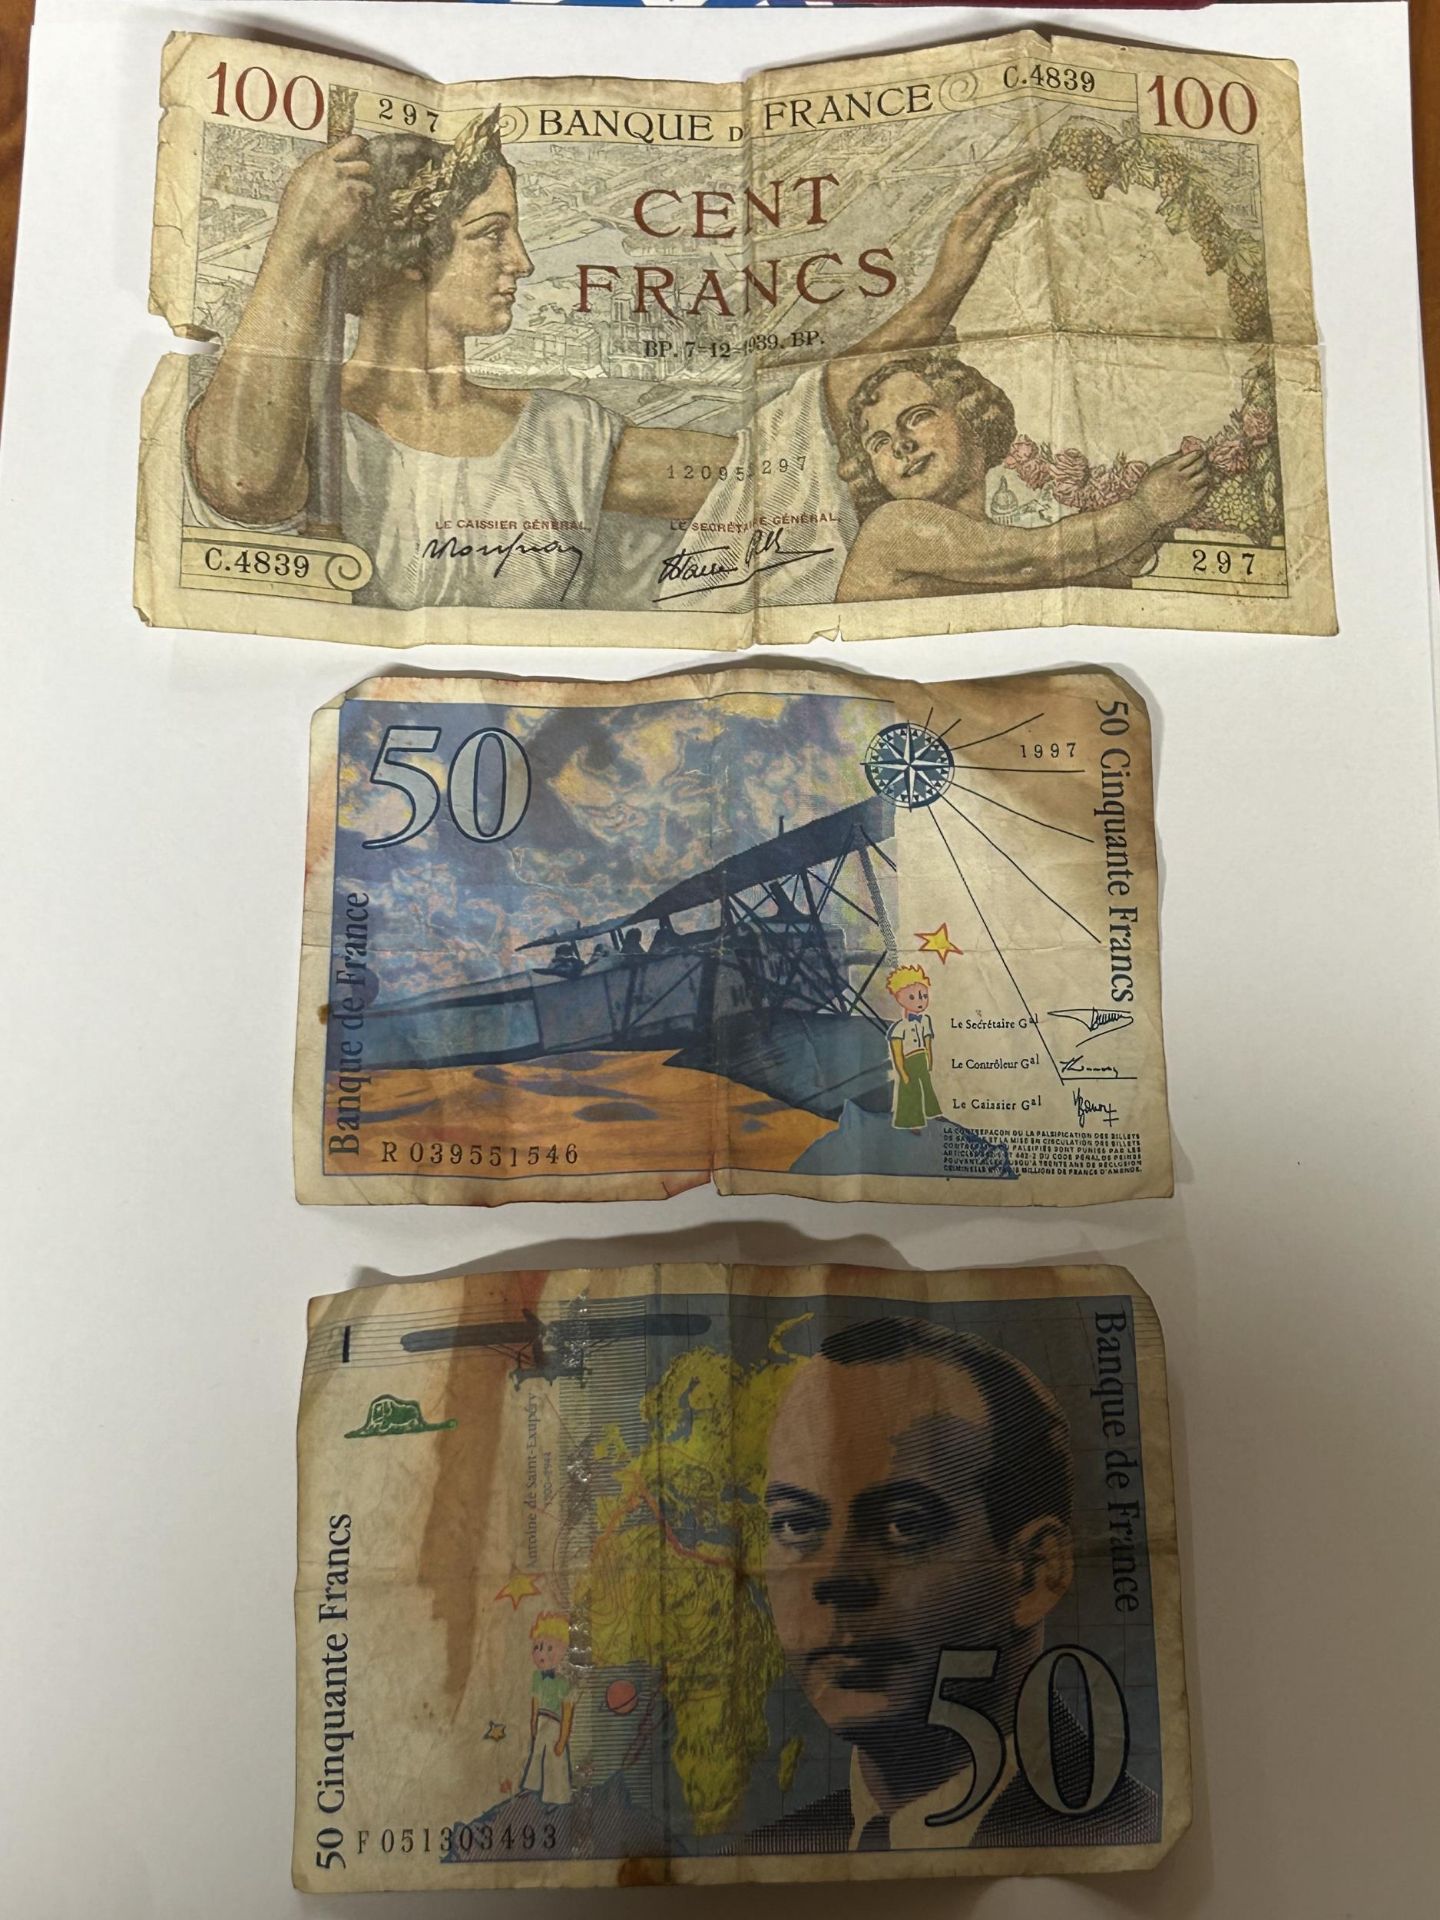 THREE VINTAGE FRENCH BANKNOTES TO INCLUDE A 100 FRANC NOTE AND TWO 50 FRANC NOTES